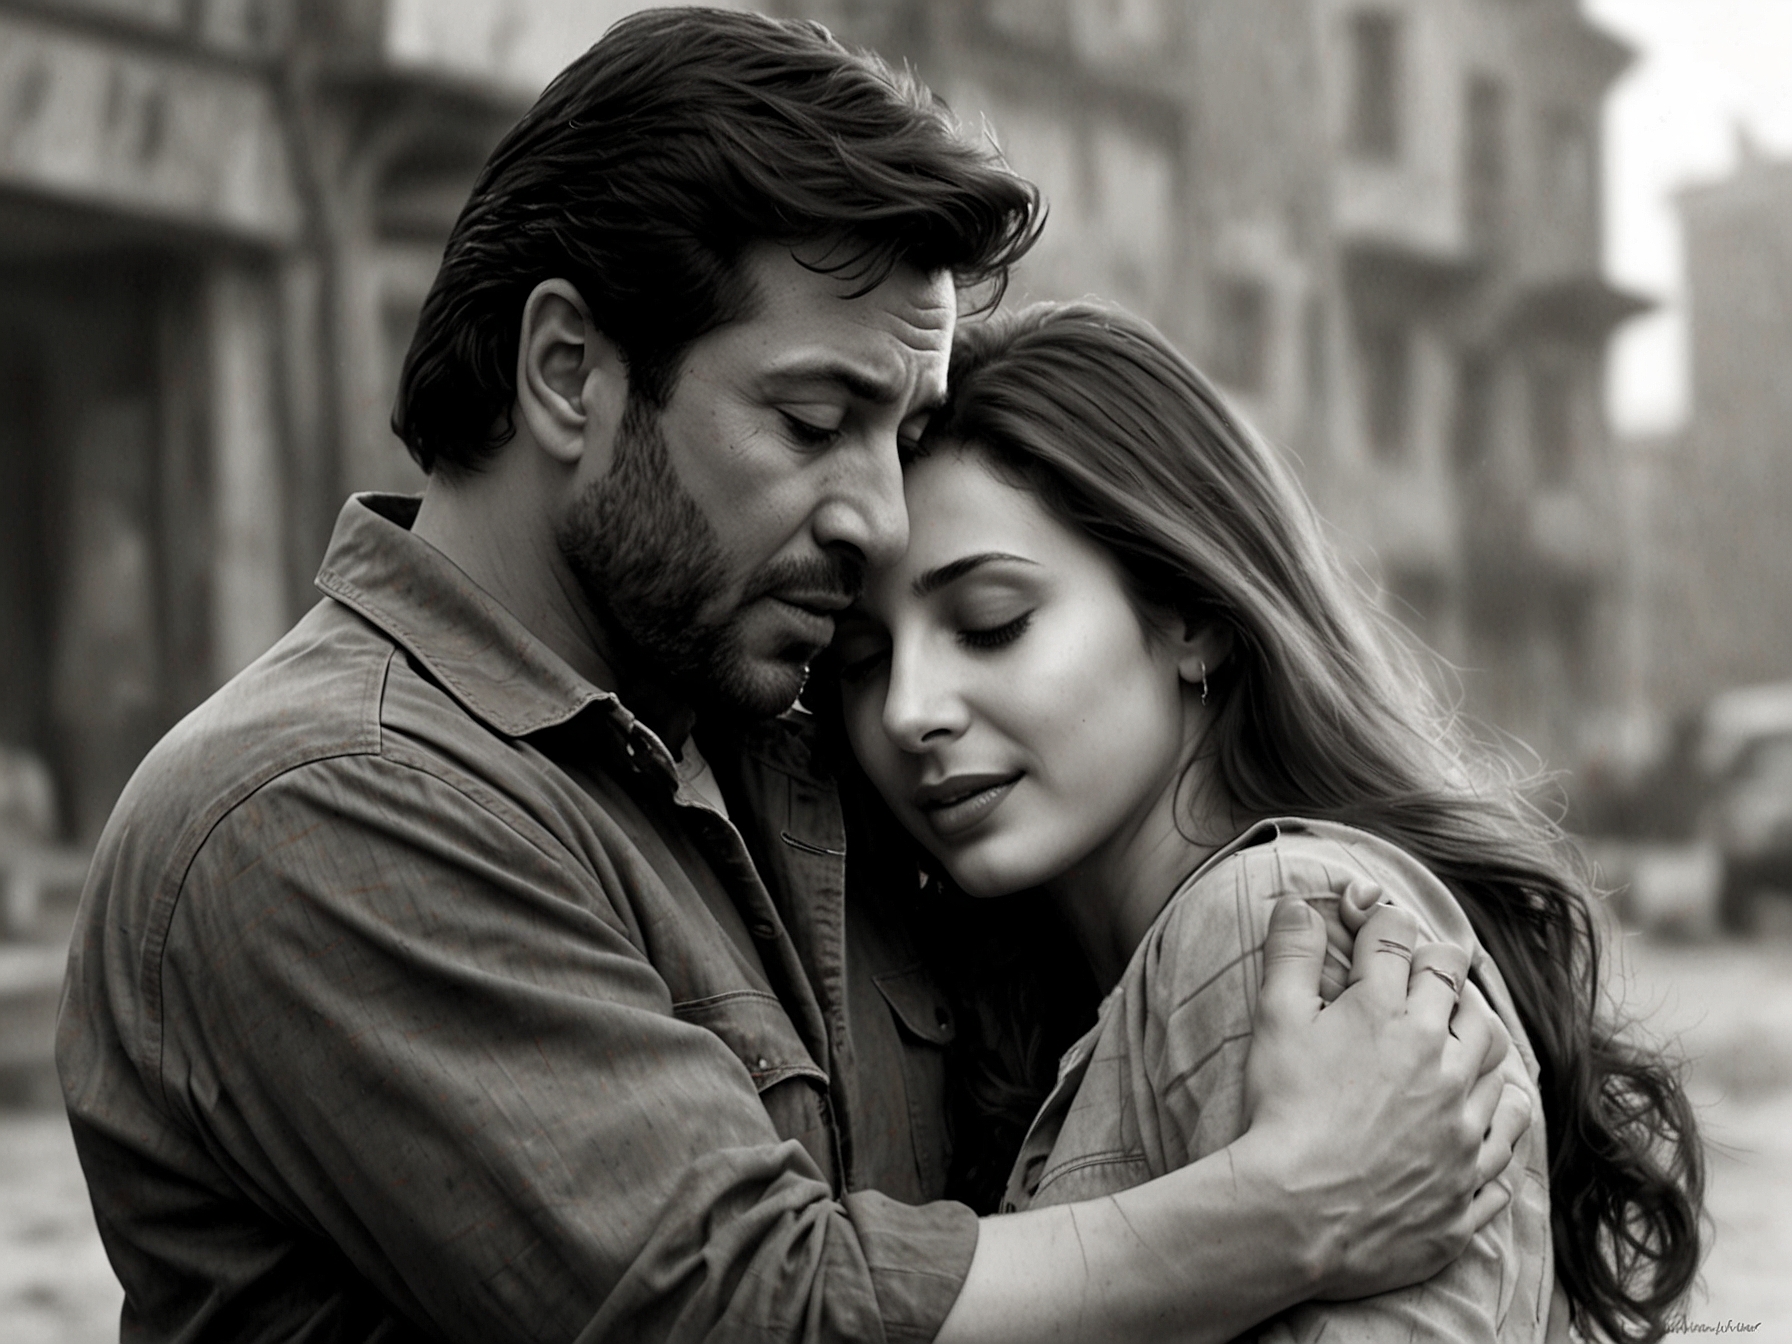 Sunny Deol and Ameesha Patel sharing an emotional scene from 'Gadar 2,' illustrating their chemistry that fans adore and emphasizing the importance of character depth in 'Gadar 3.'